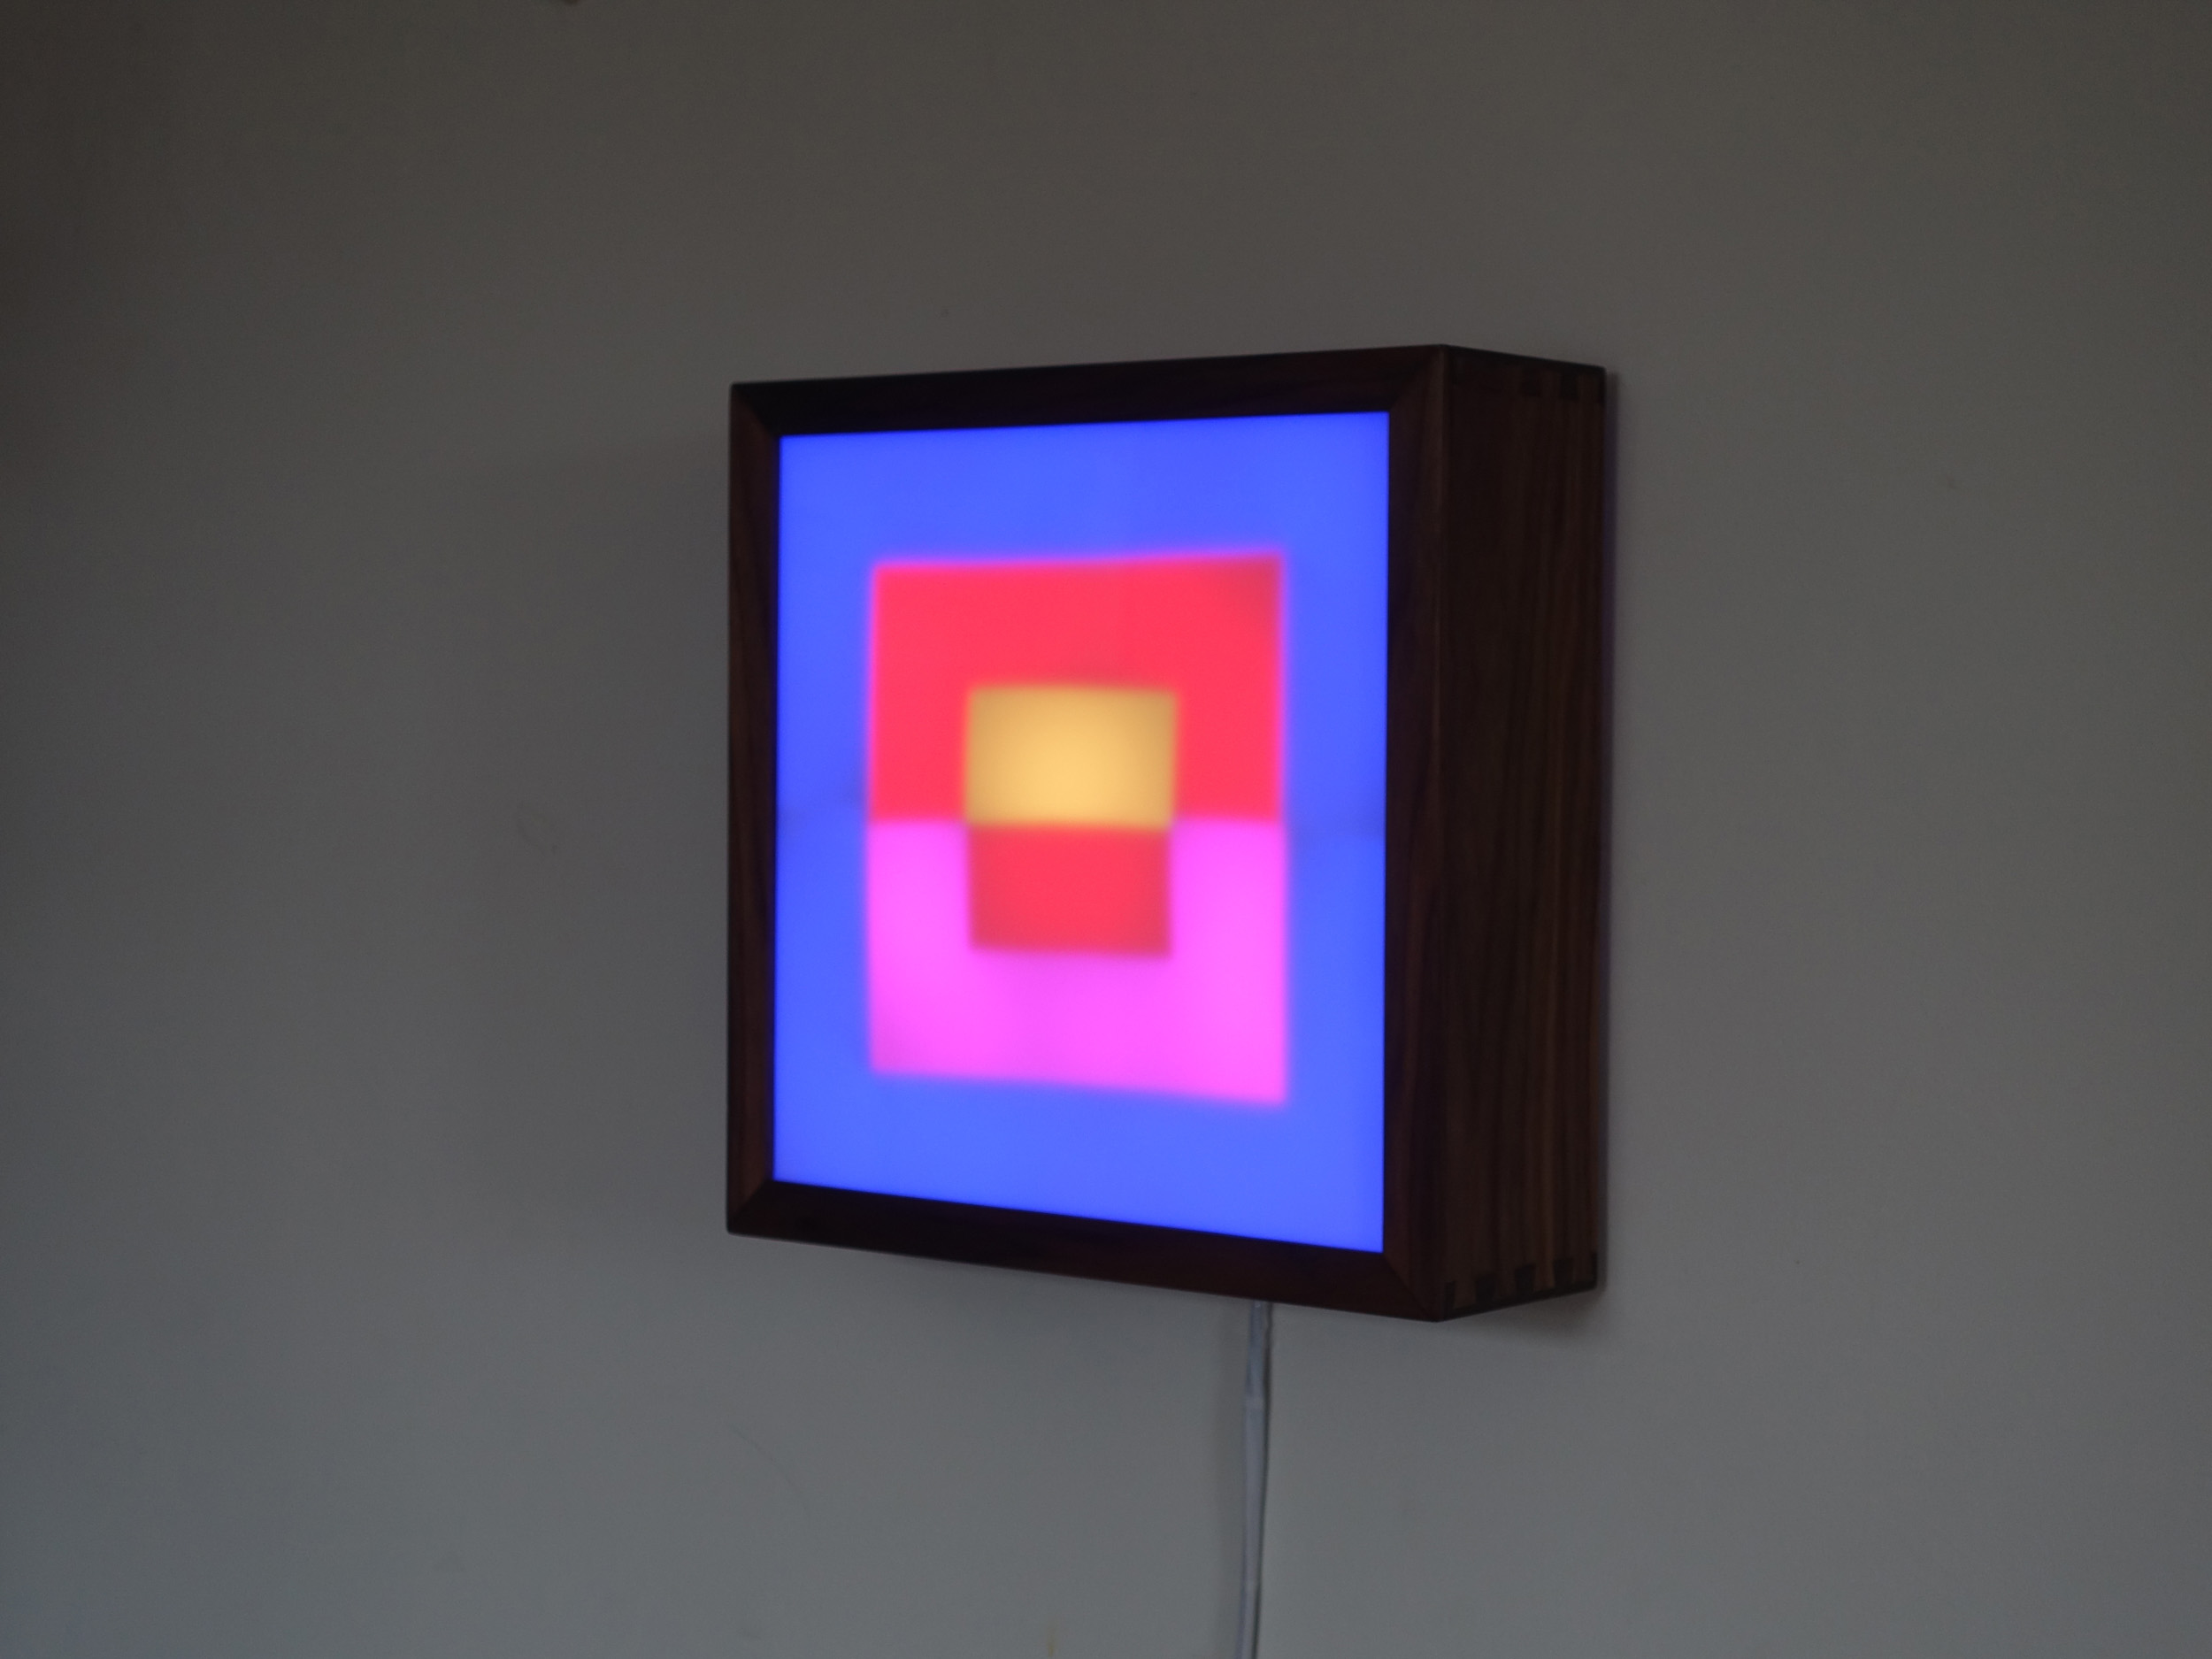 Copy of Square LED Lightbox prototype 1 of 5